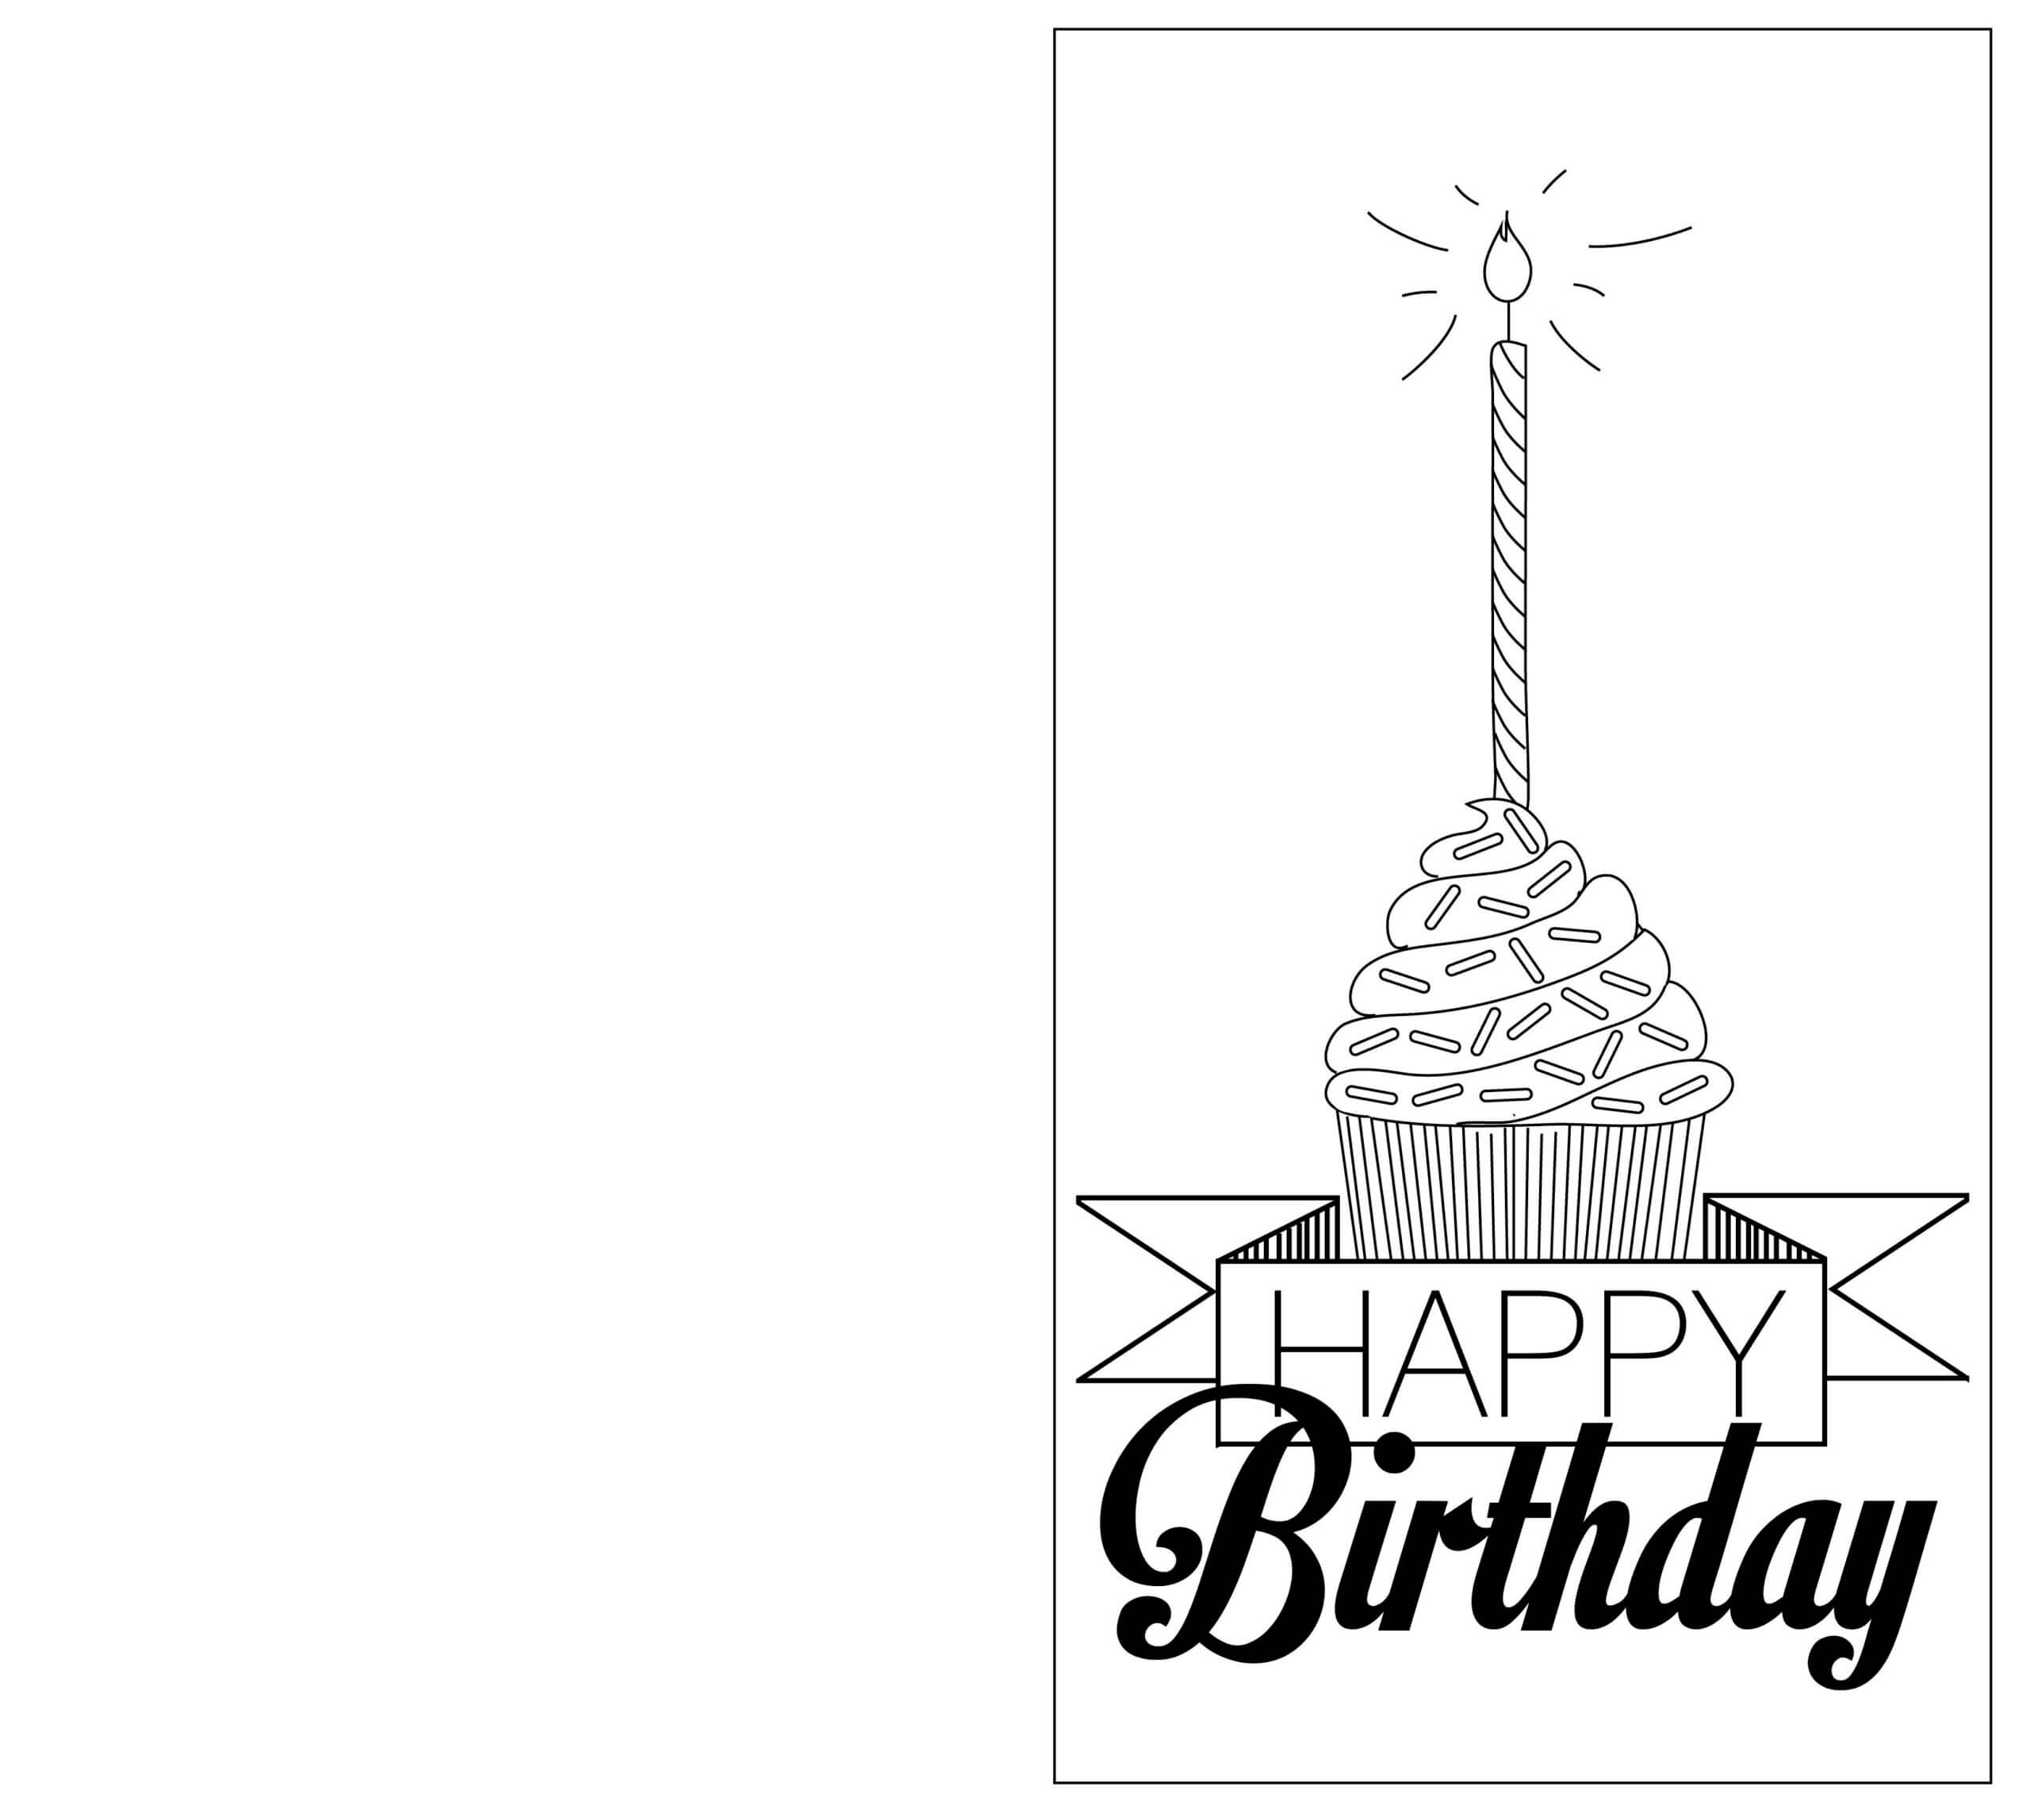 Print Out Black And White Birthday Cards | Birthday Card Within Foldable Birthday Card Template